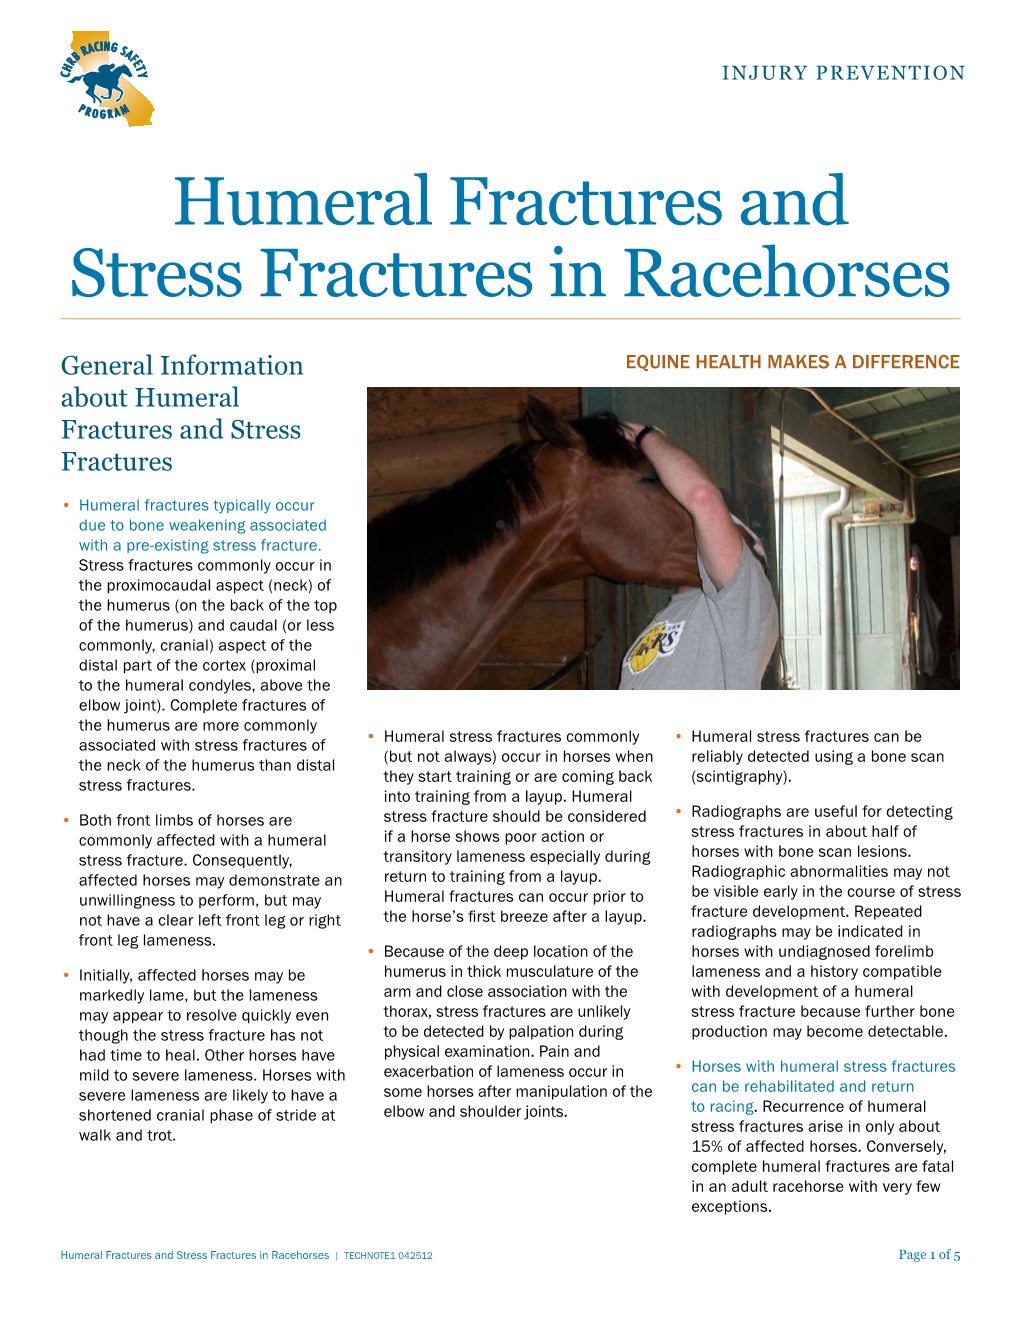 Humeral Fractures and Stress Fractures in Racehorses